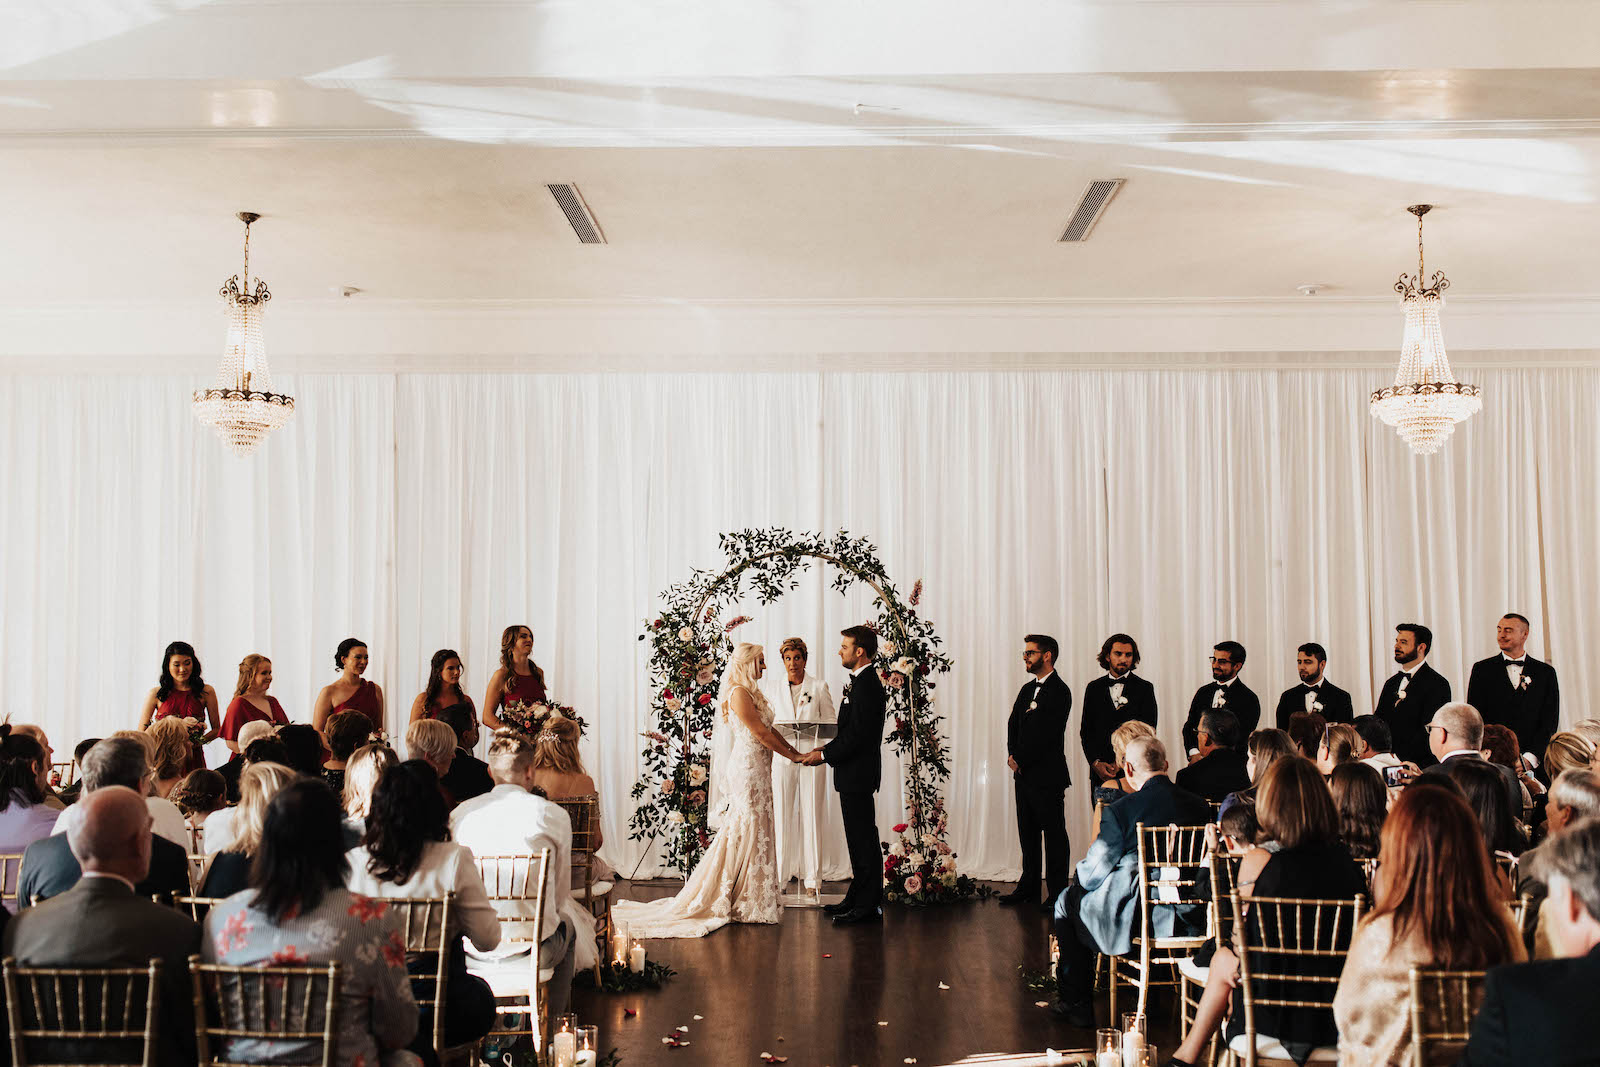 Warm Romantic Neutral Wedding Ceremony, Bride and Groom Exchanging Wedding Vows, Rounded Arch with Greenery, White Roses and Berry Color Flowers | Tampa Bay Wedding Planner Coastal Coordinating